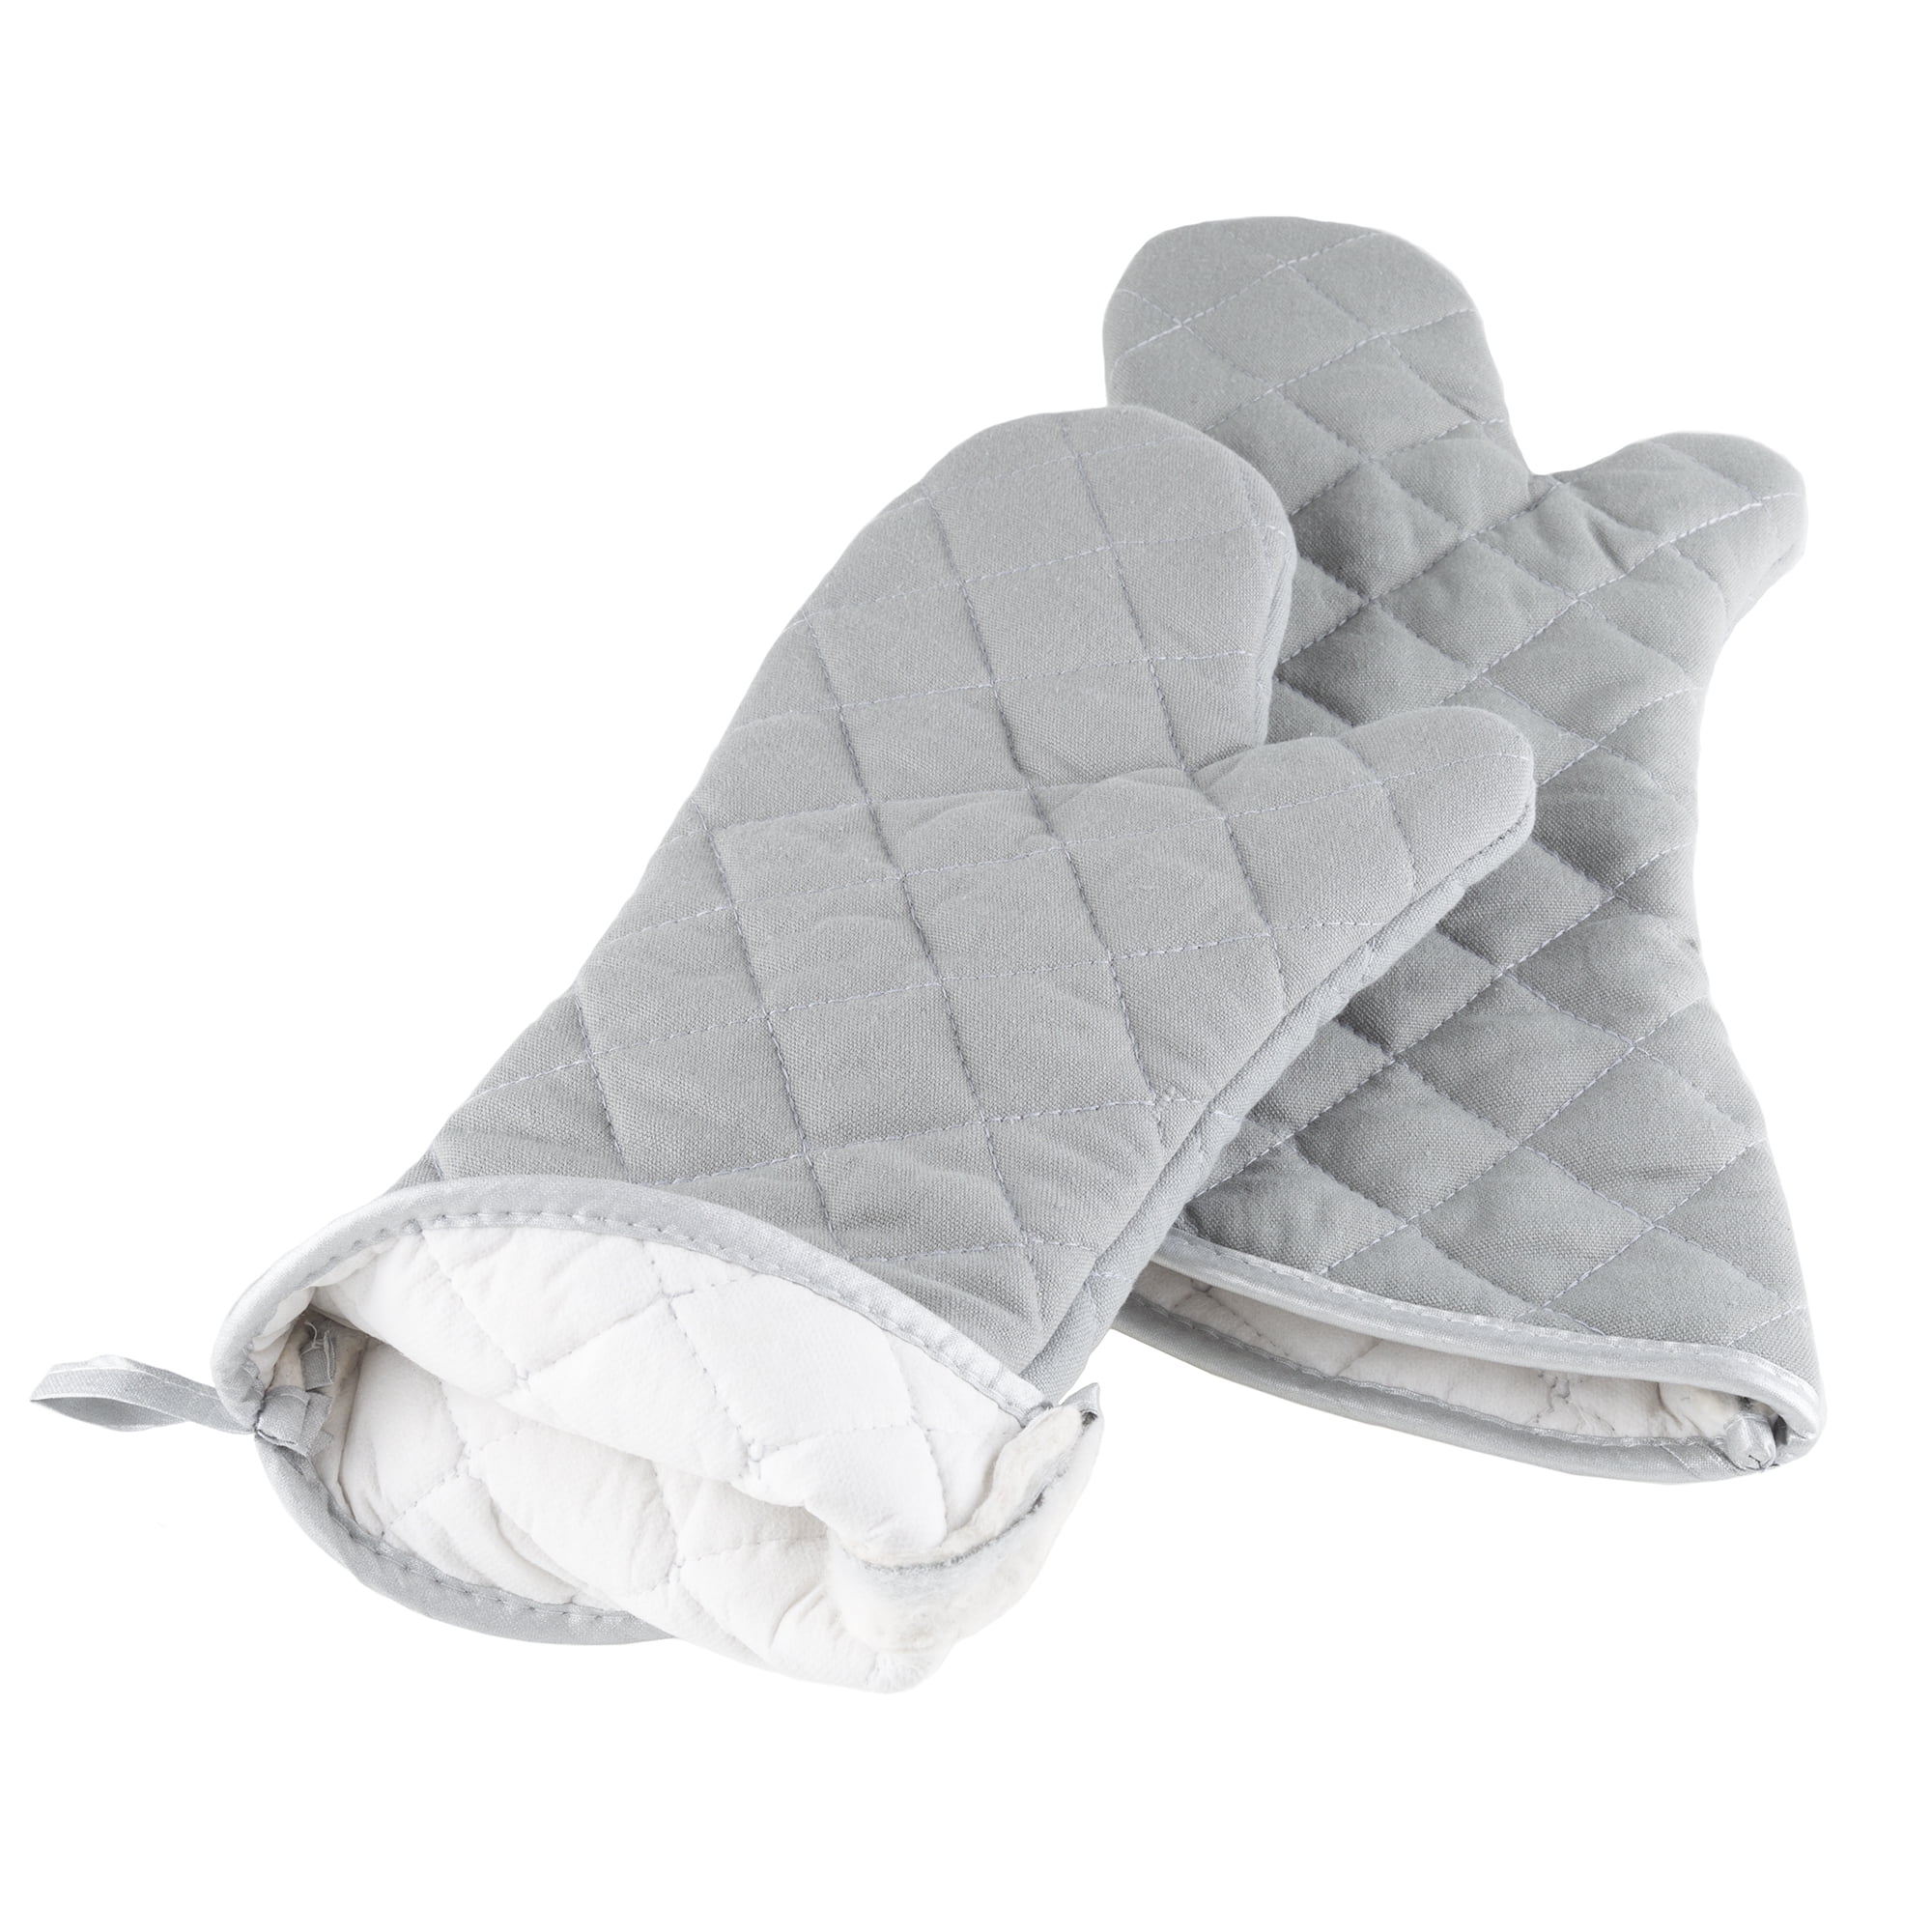 Chinese Factories Manufacture Large Quantities of Wholesale White Short  Kitchen Oven Mitts - China Short Oven Mitts and Kitchen Oven Mitt price